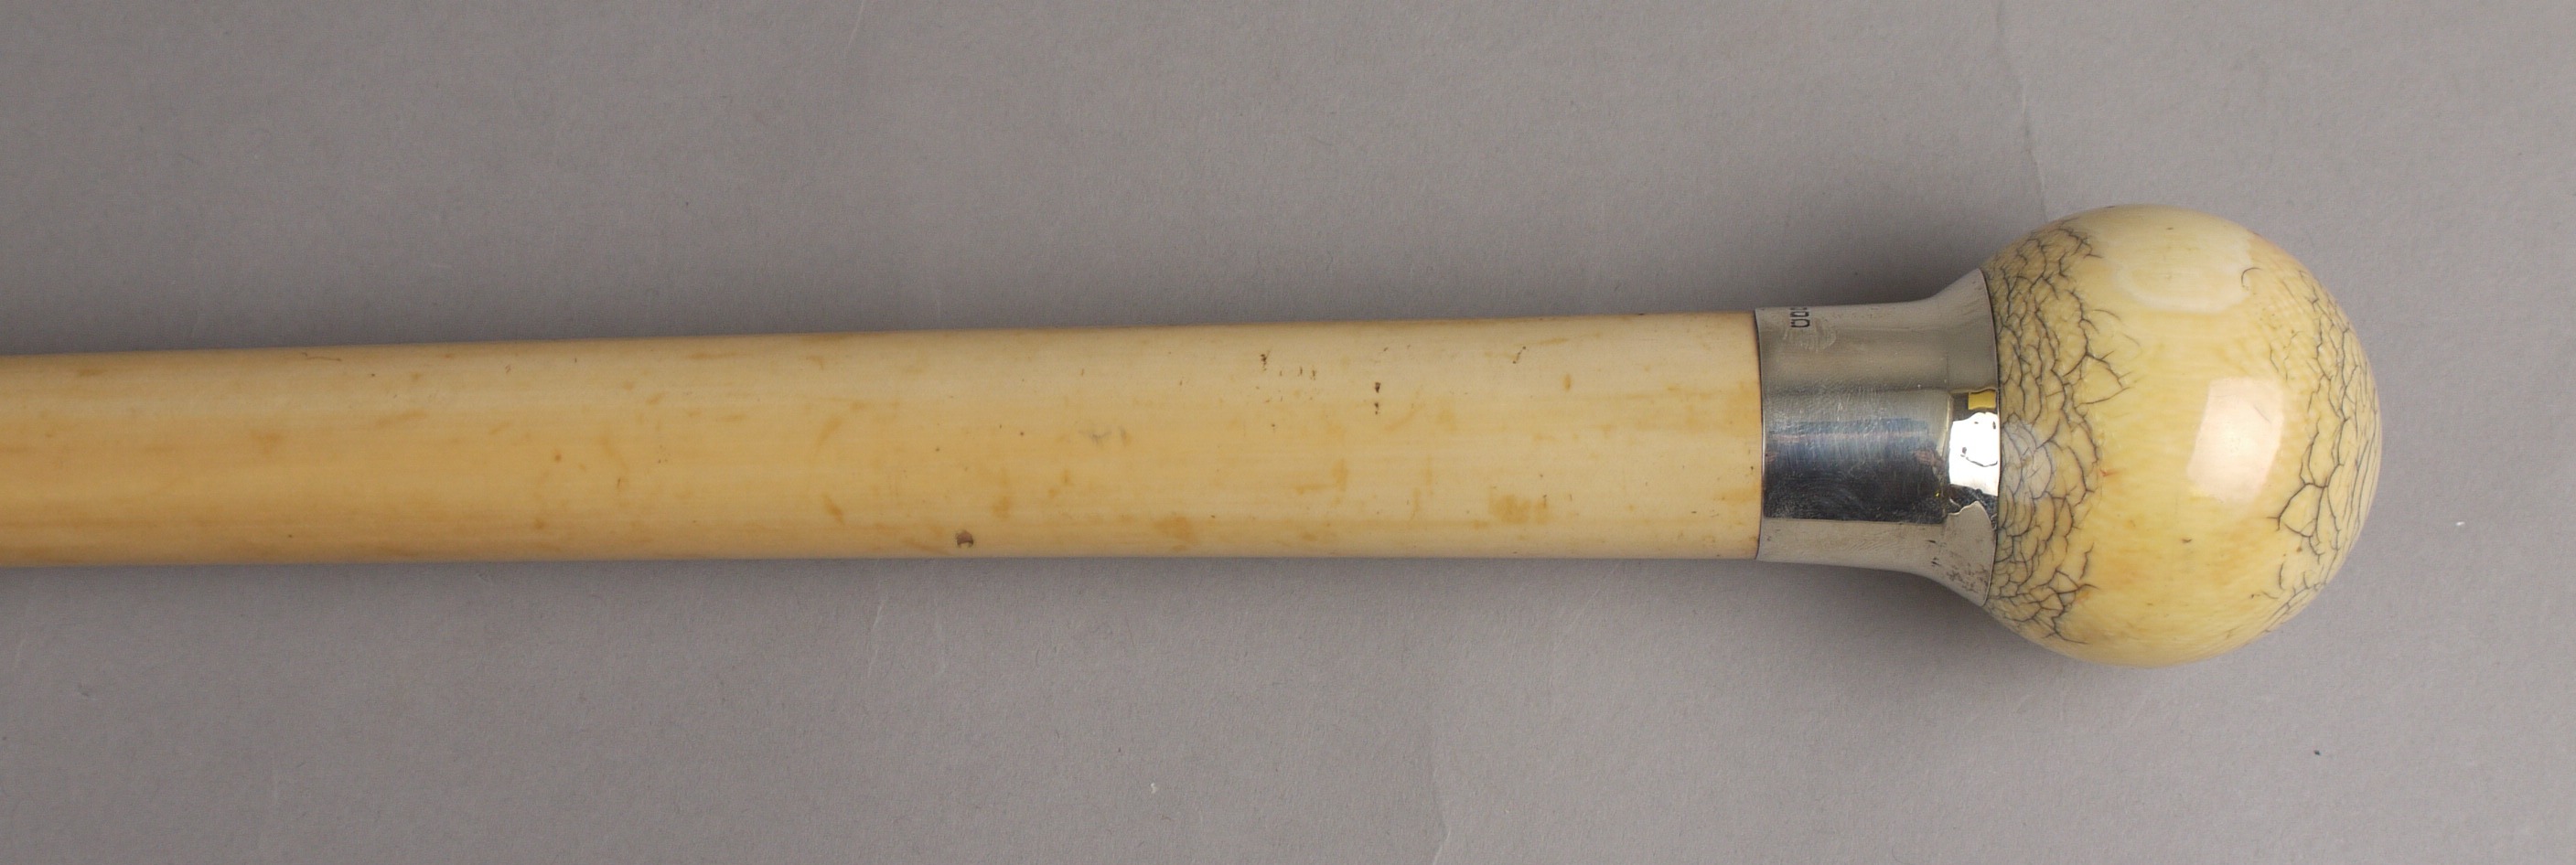 AN EARLY 20TH CENTURY MALACCA WALKING CANE, by J. Howell & Co, with ivory ball knop and silver